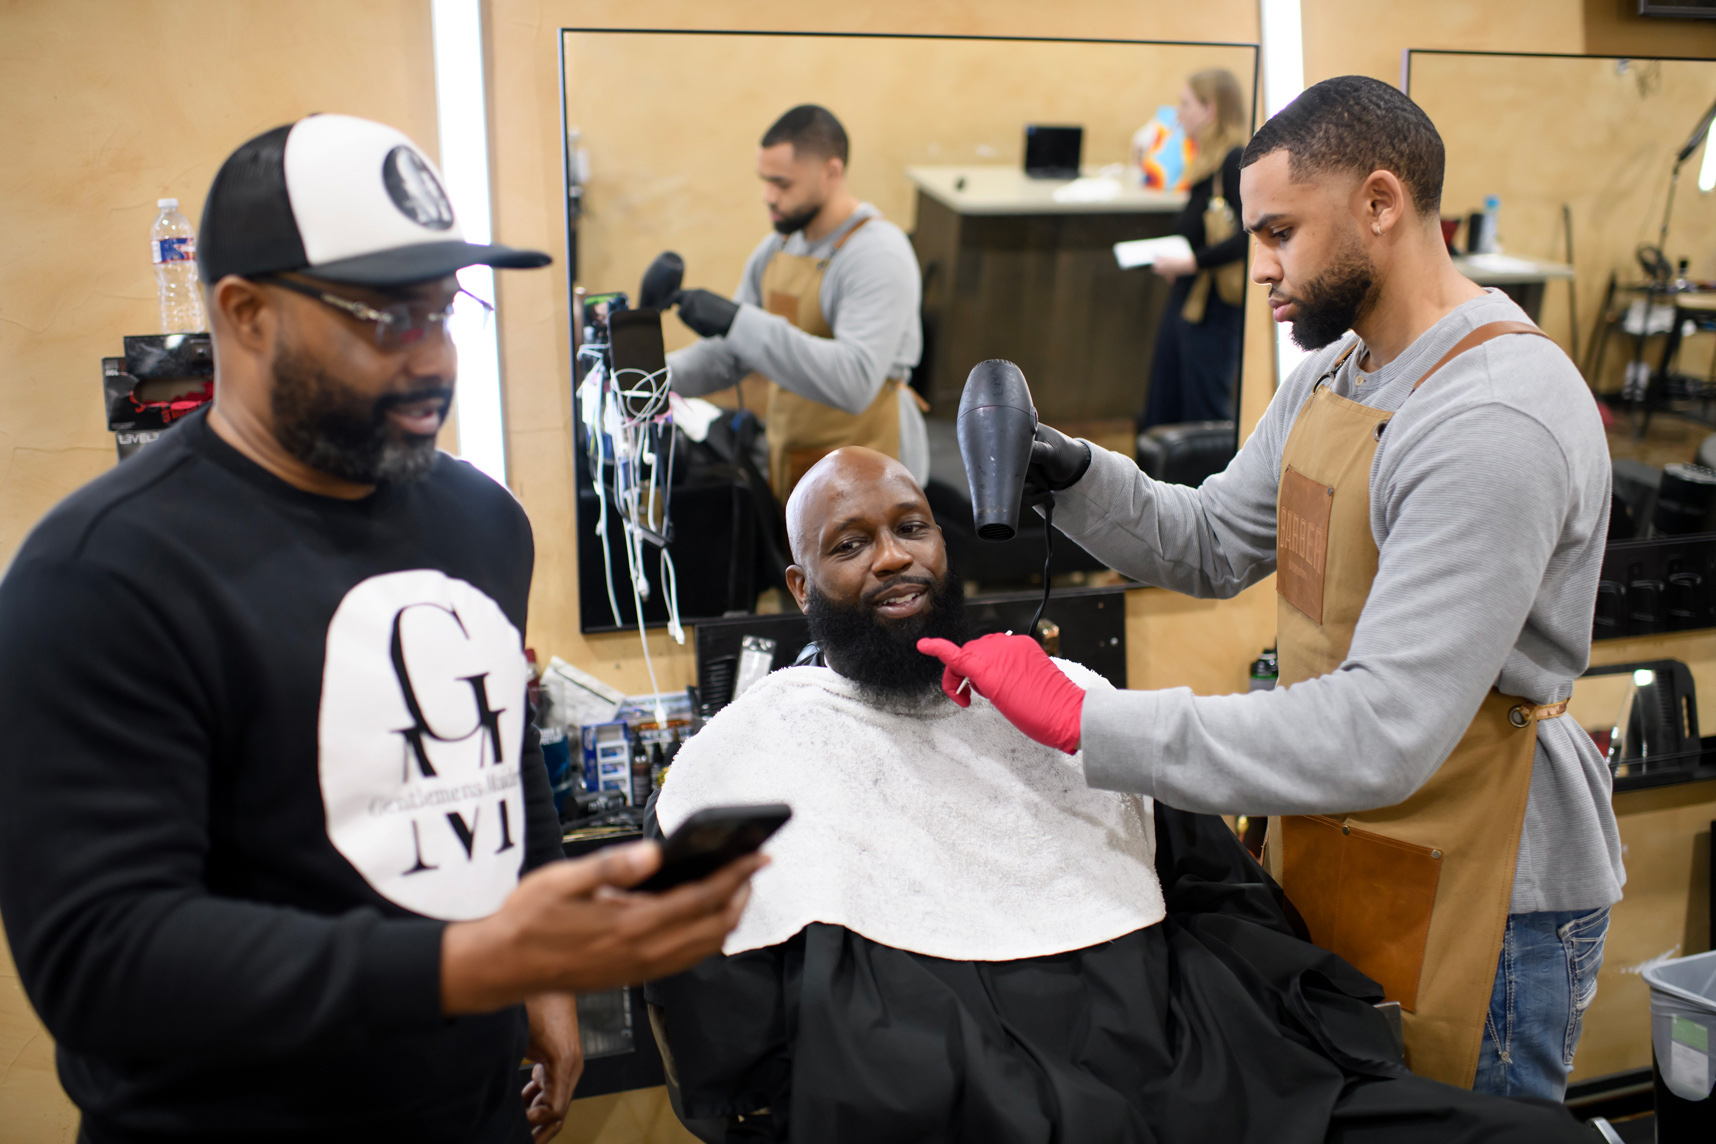 Cameron Campbell, center, talks to Amin Griffin, left, while getting his beard lined up by Dimitri Maynard, right at Beau's Place barbershop on Feb. 7 in Katy. Campbell has grown frustrated over the past decade with members of the district’s school board.